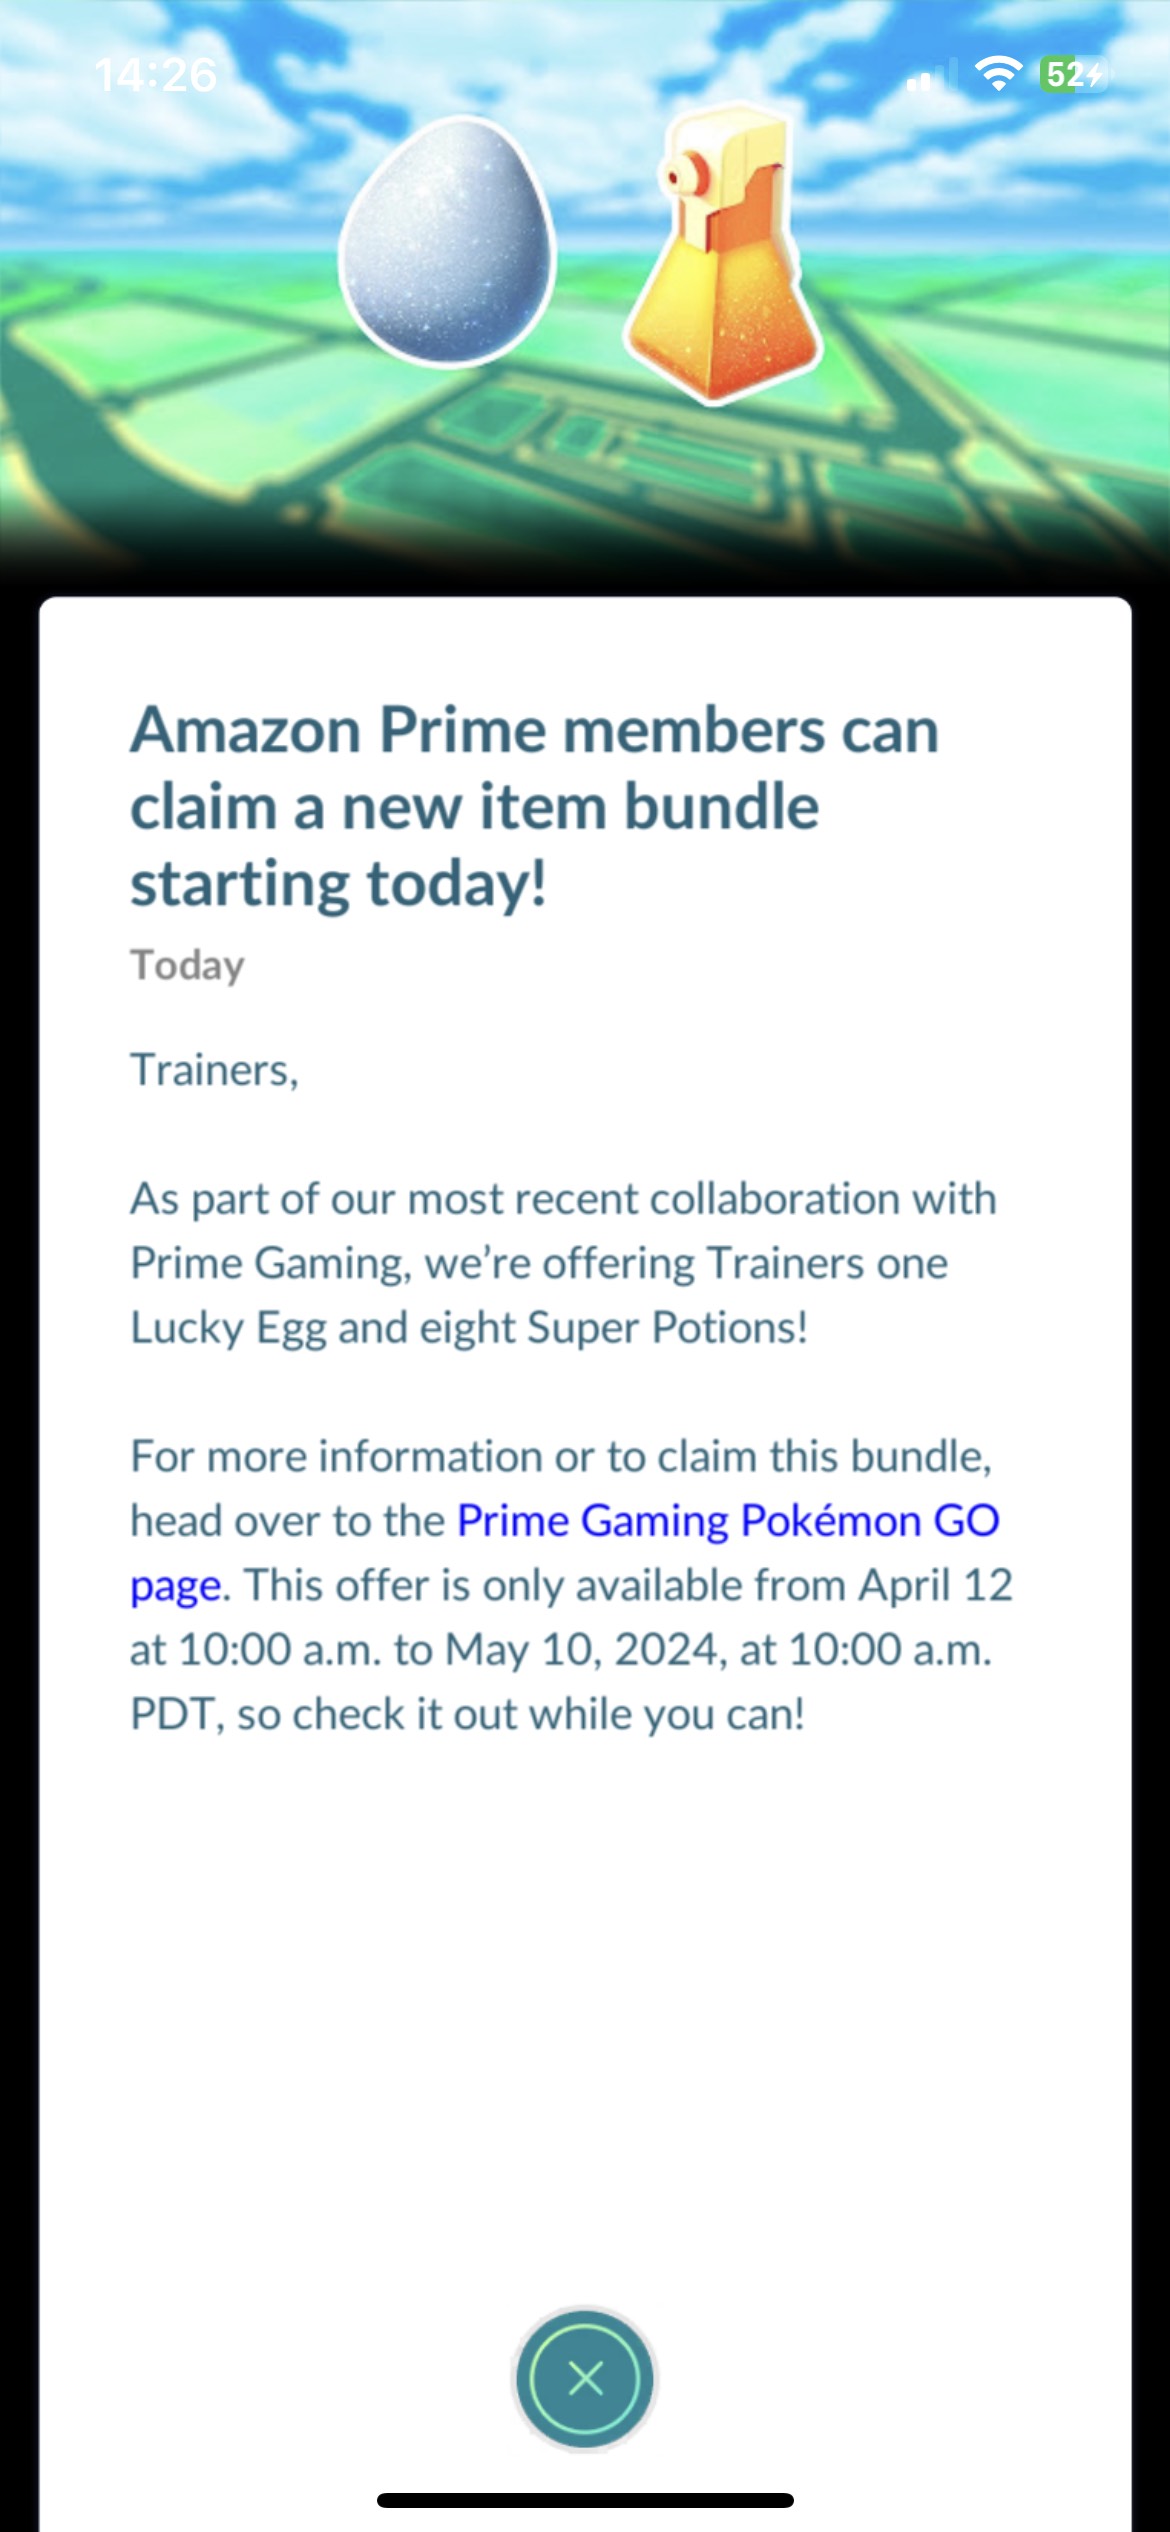 Pokemon GO - FREE Lucky Egg and 8 Super Potions - for Amazon Prime members